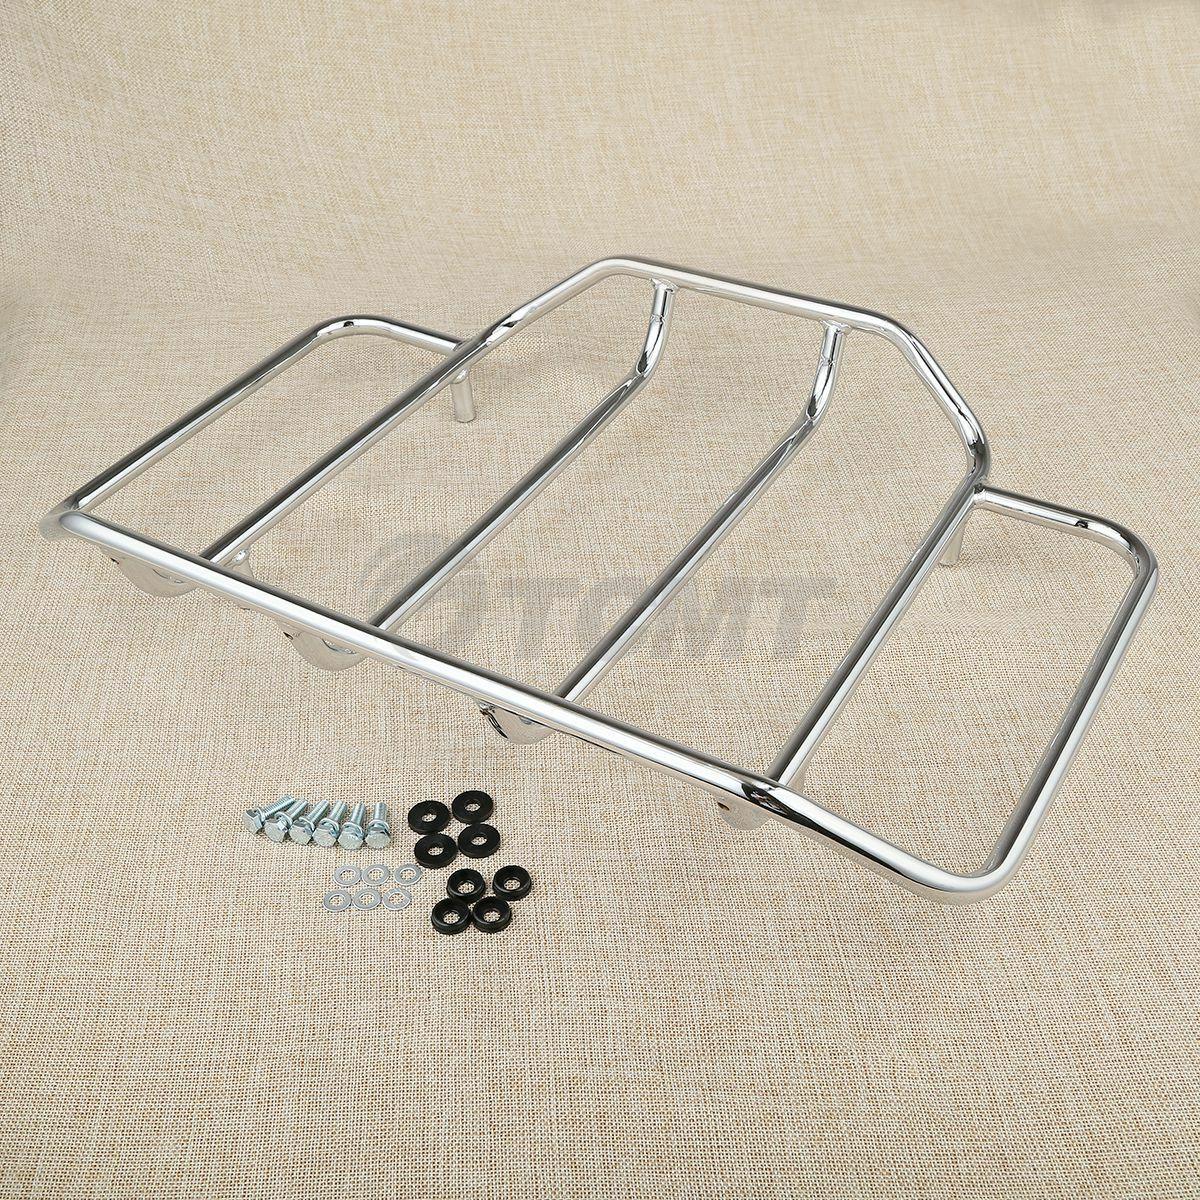 Chrome Luggage Top Rack Fit For Harley Touring Tour Pak Road King Street Glide - Moto Life Products